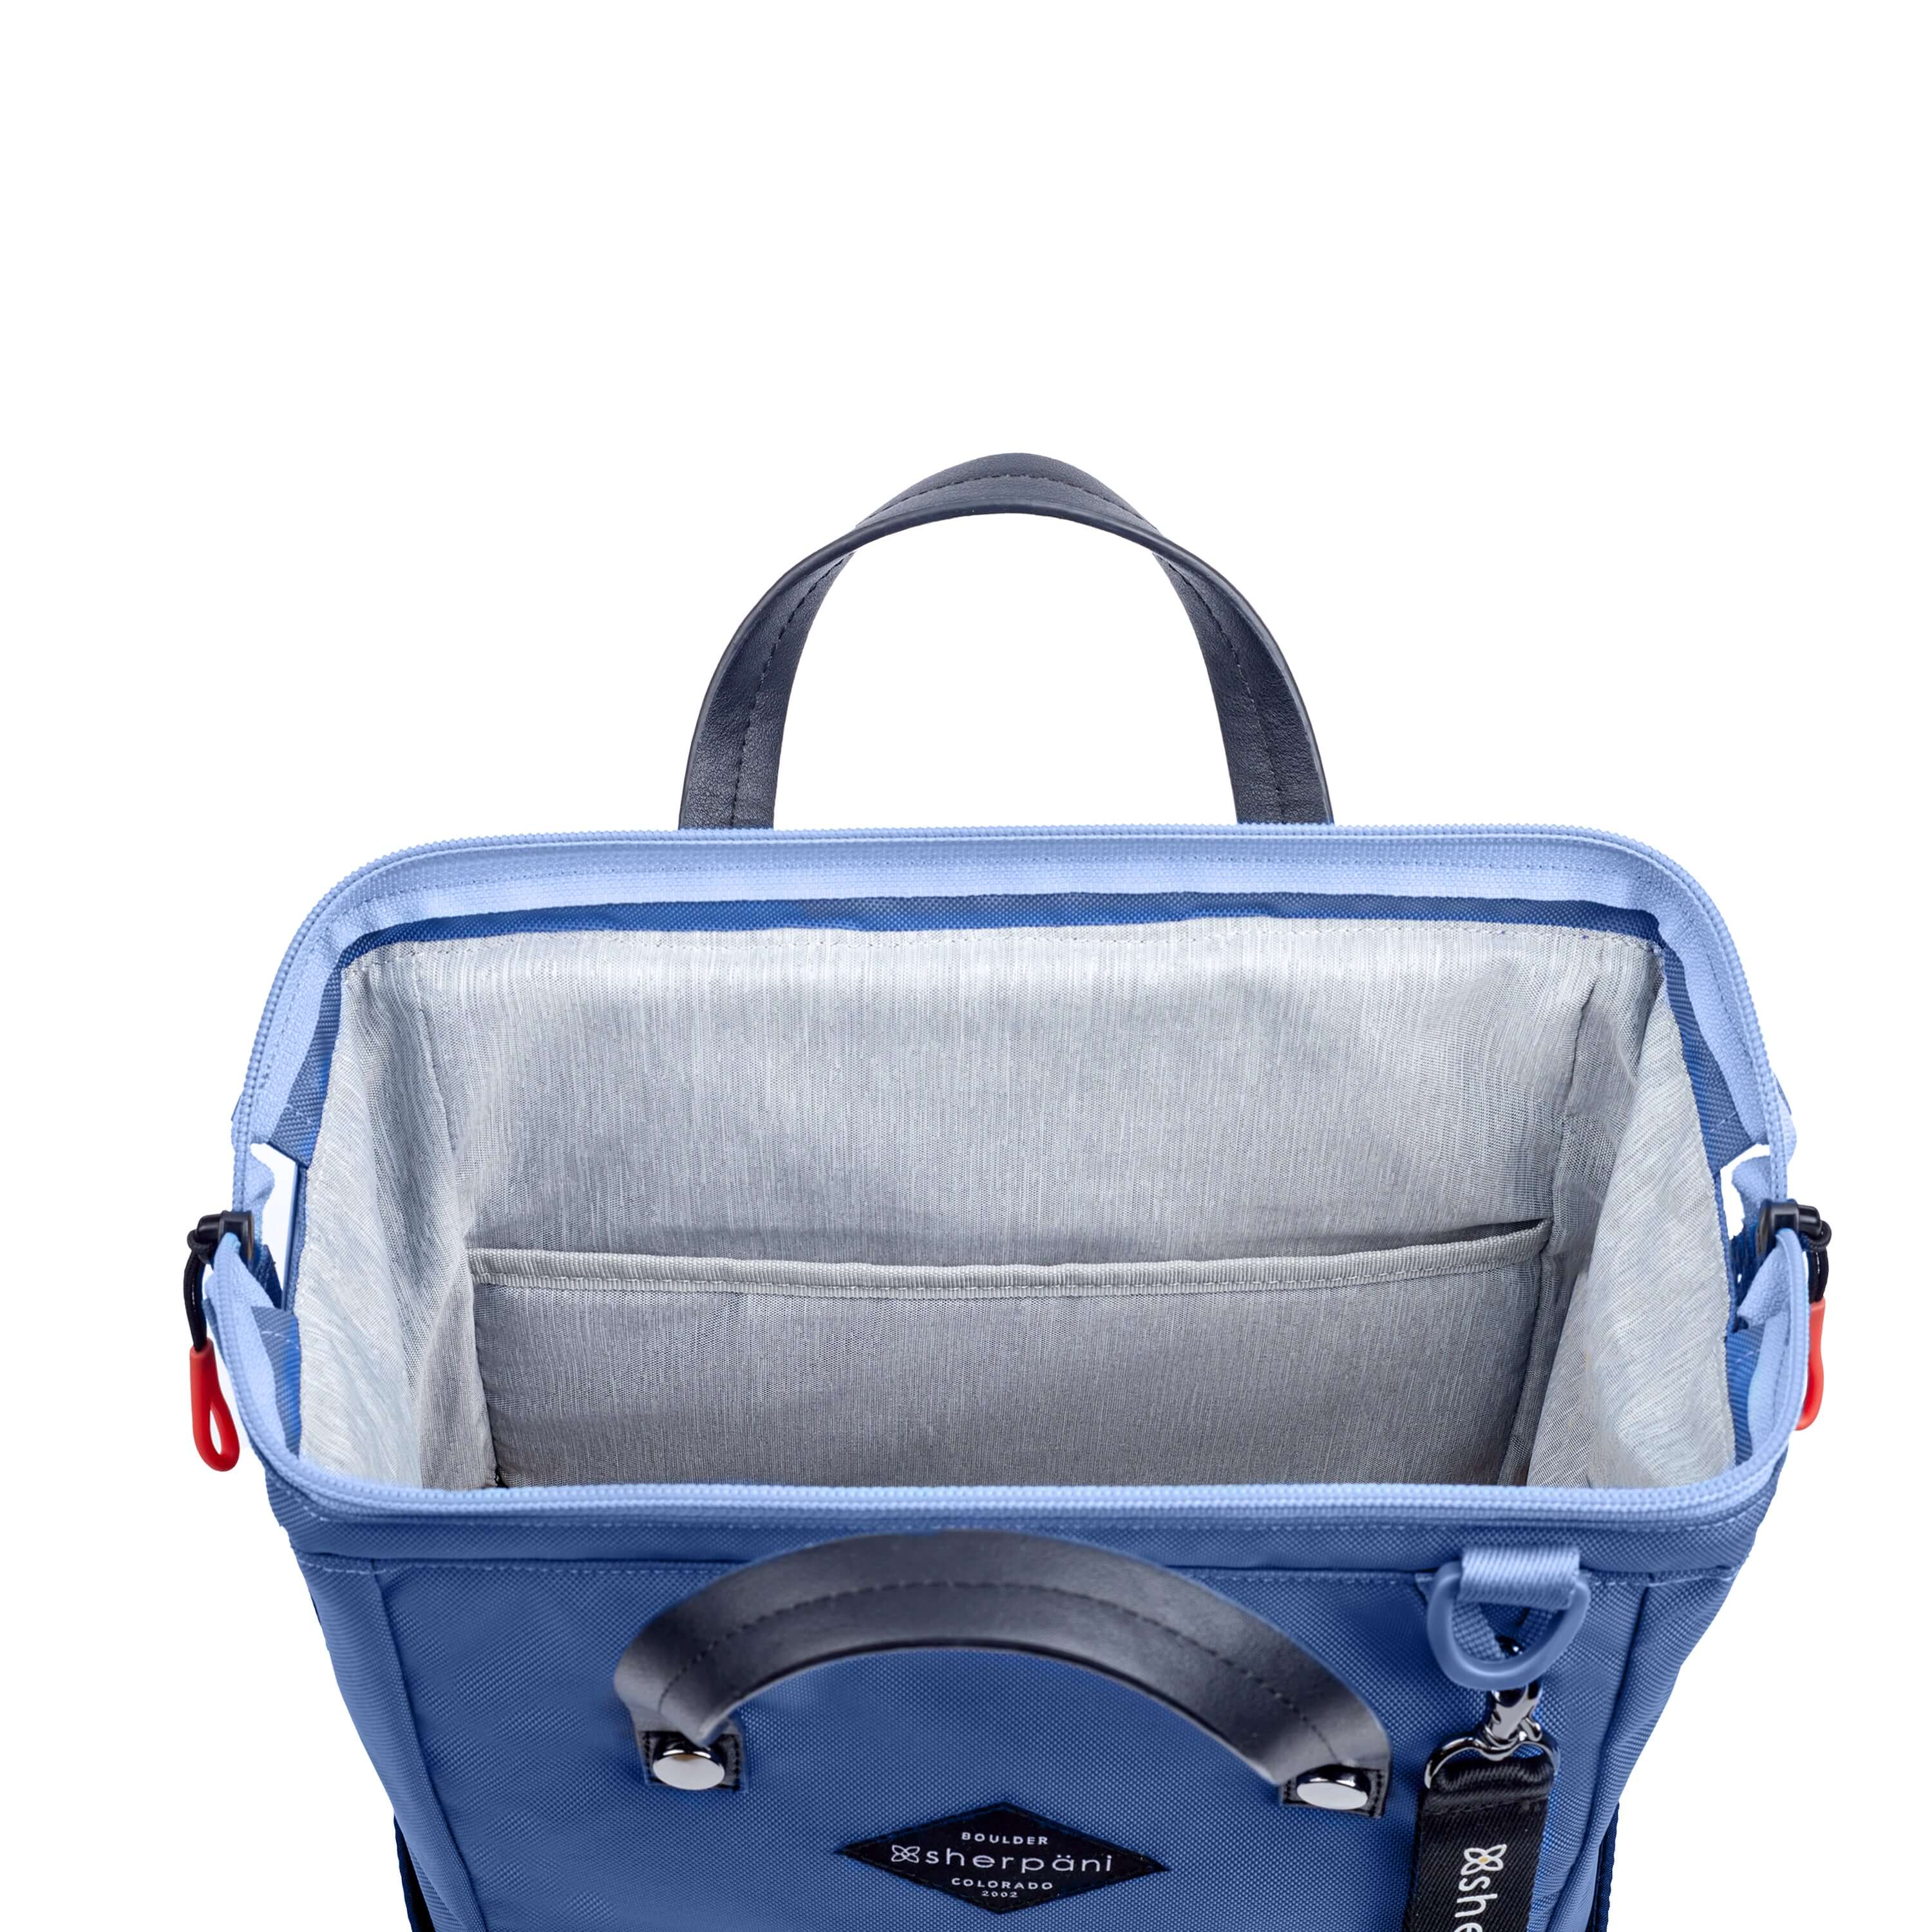 Top view of Sherpani three in one bag, the Dispatch in Pacific Blue. The main zipper compartment is open to reveal a doctor bag style opening with a rectangular metal frame. The inside of the bag is light gray and features an internal pouch. 